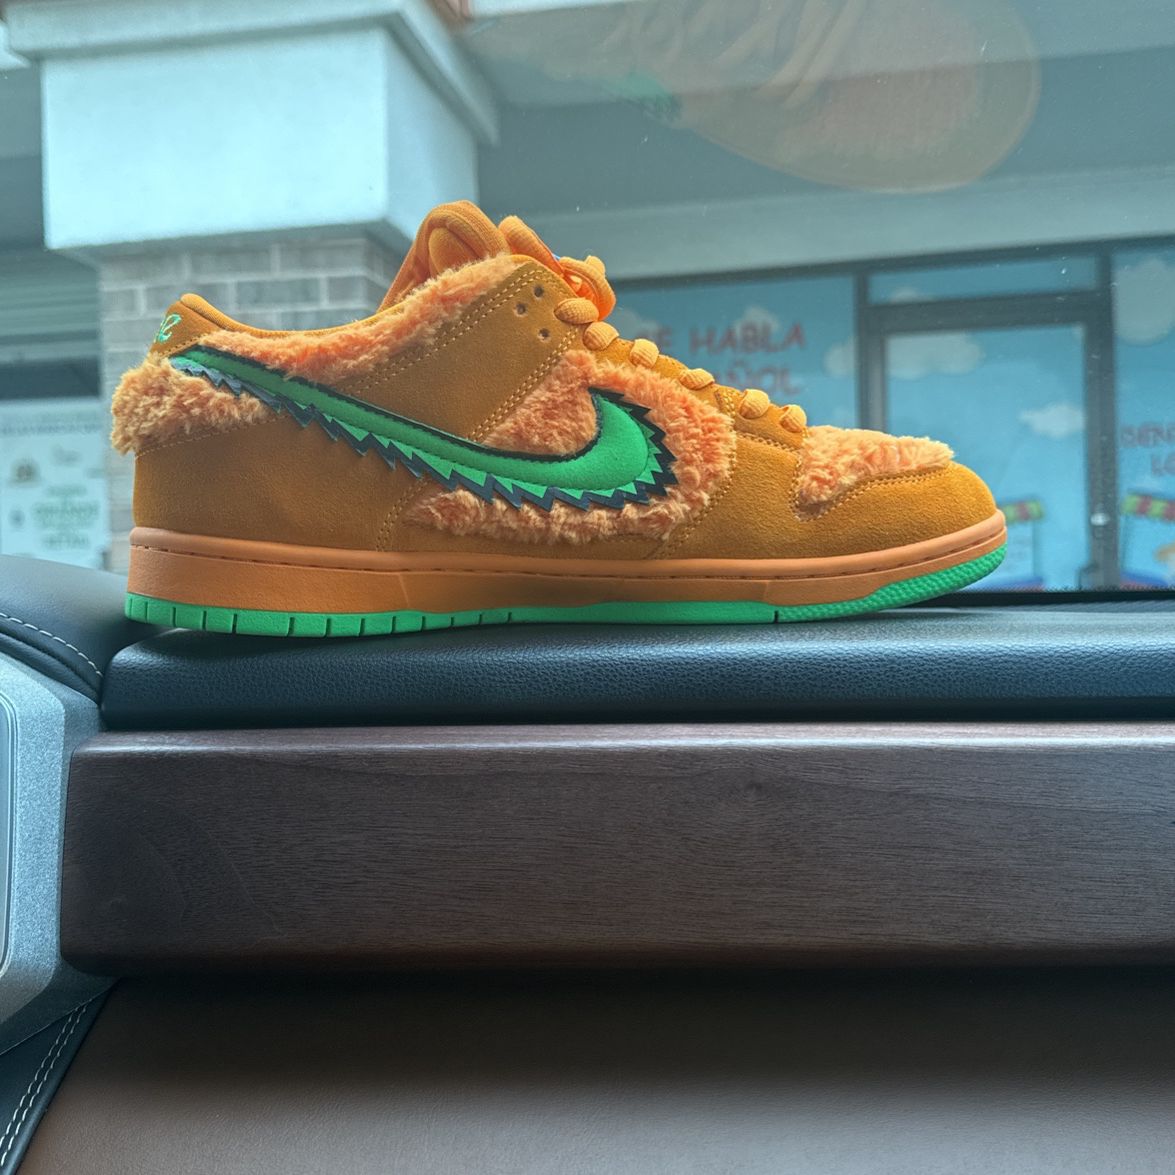 Nike Dunks Lowe’s, Grateful Dead, Orange And Green Used Only One Time Box